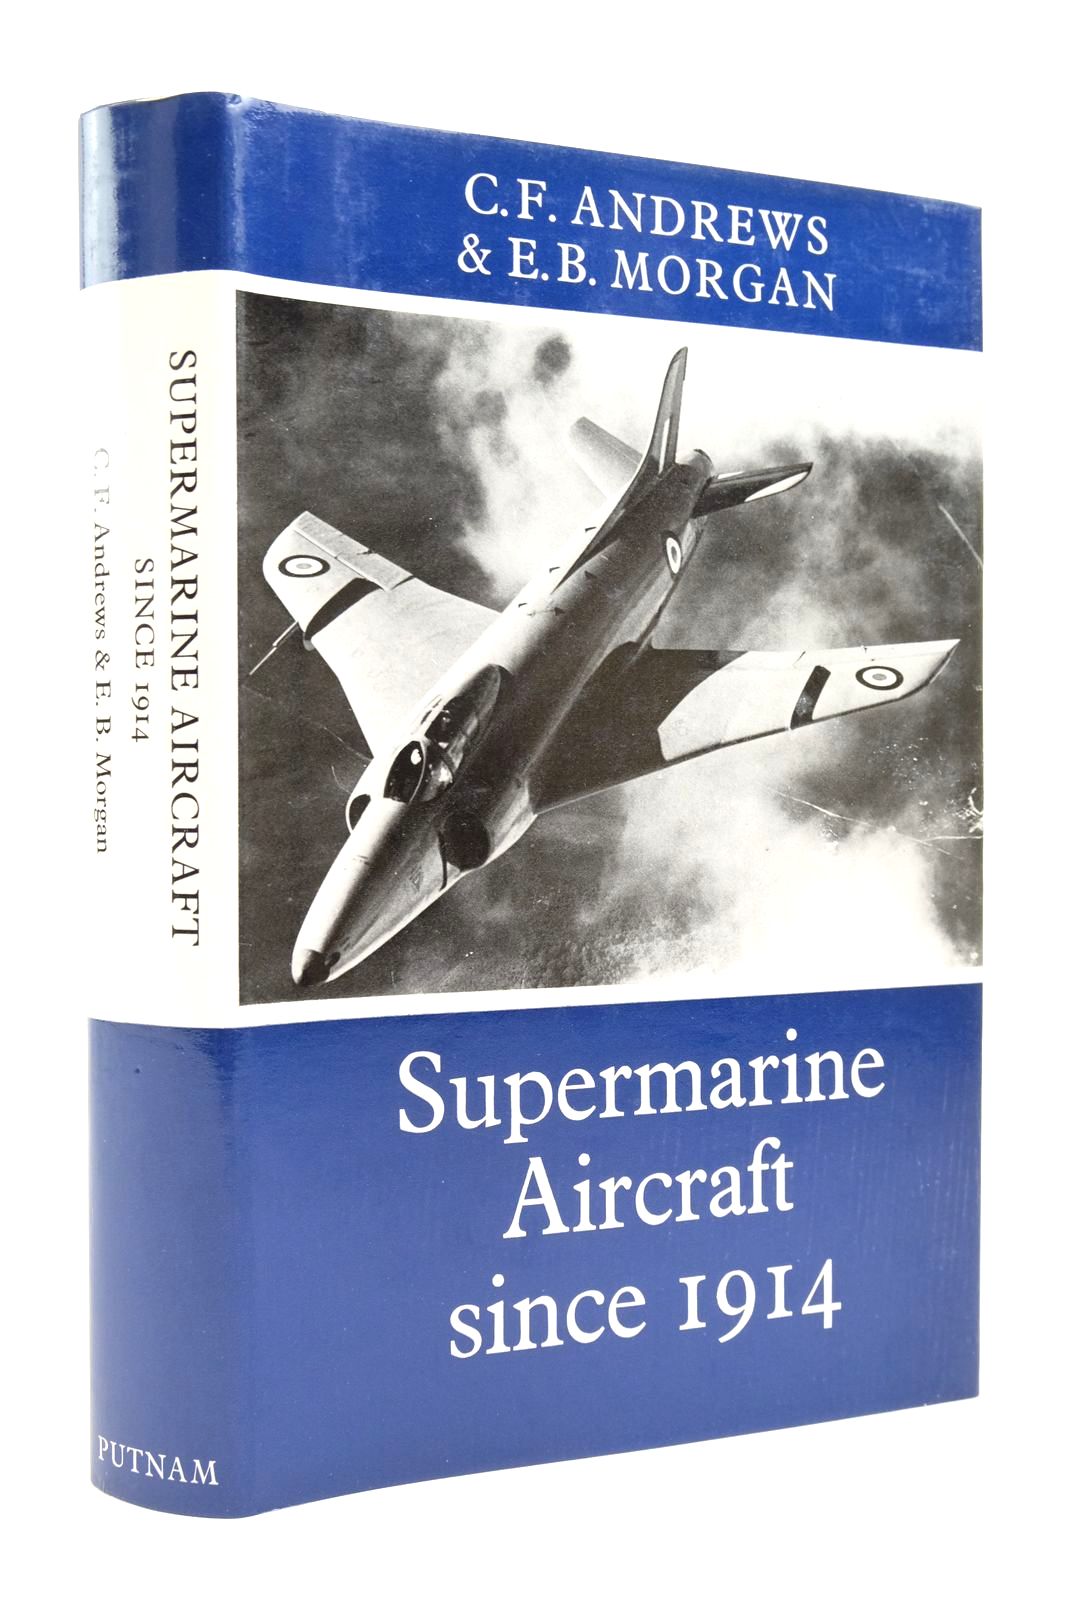 Photo of SUPERMARINE AIRCRAFT SINCE 1914 written by Andrews, C.F. Morgan, E.B. published by Putnam (STOCK CODE: 2138484)  for sale by Stella & Rose's Books